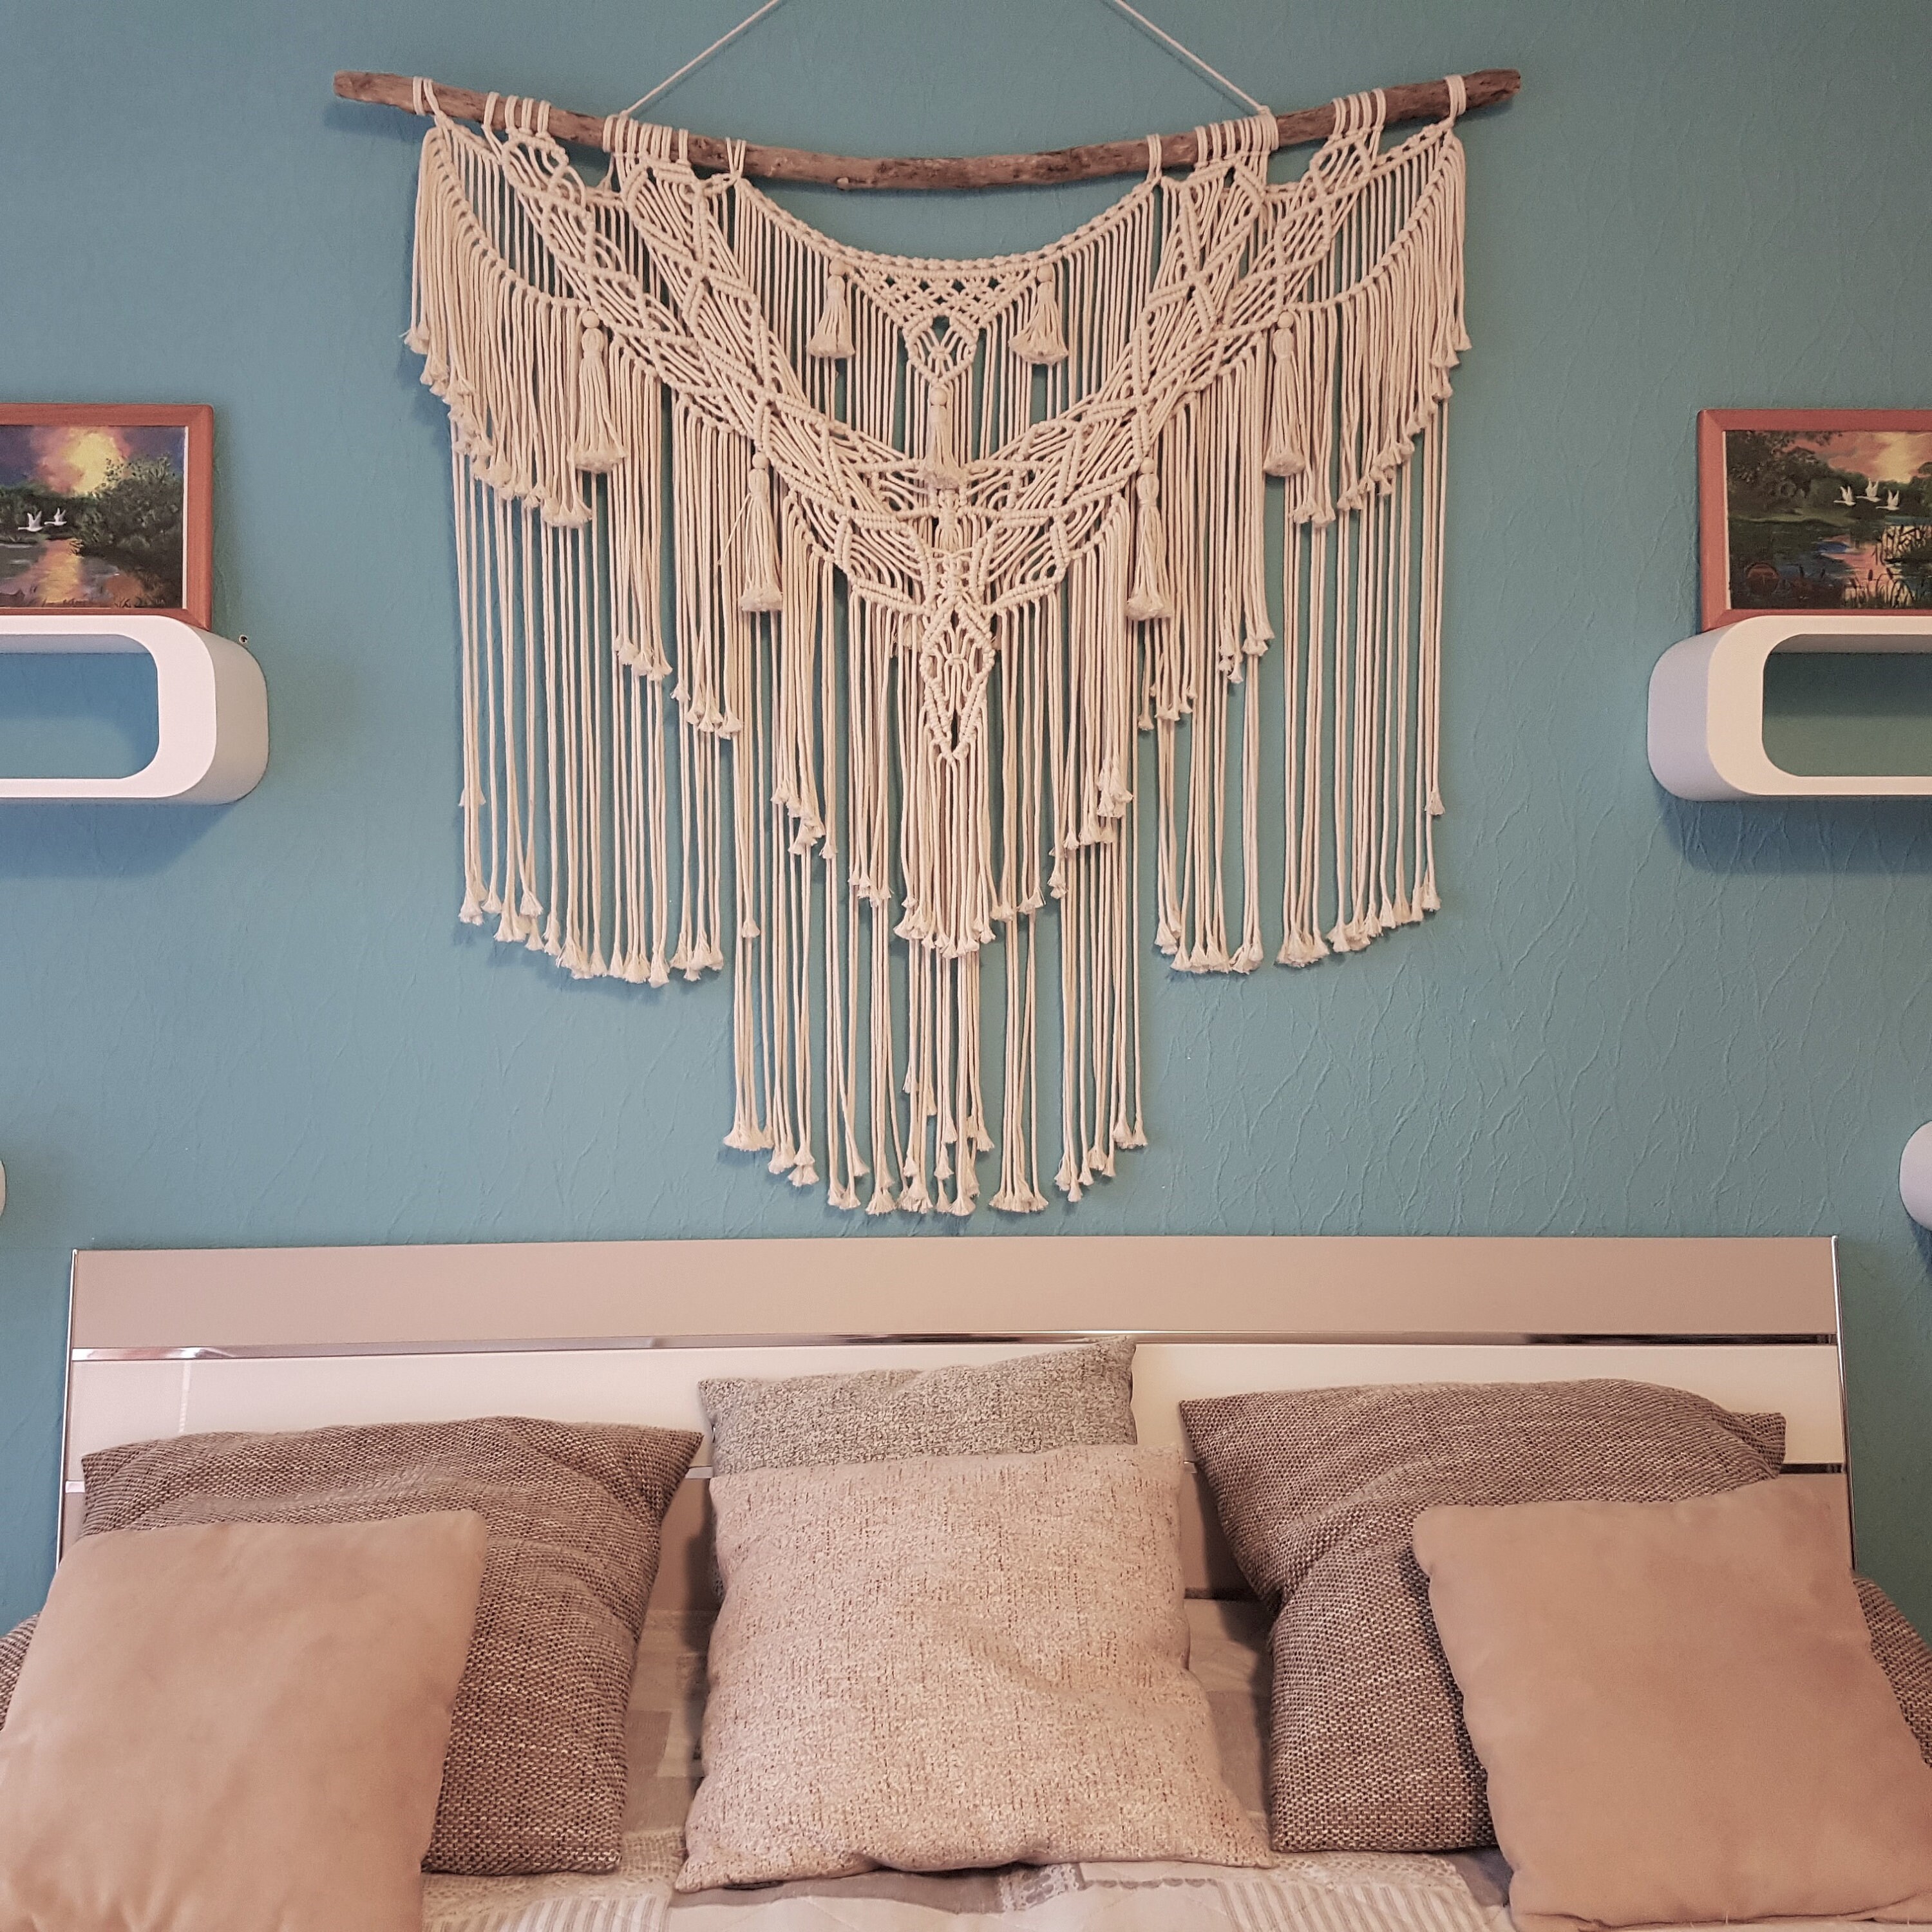 QLBUJ Large Macrame Wall Hanging Natural Driftwood Macrame Tapestry Above  Headboard Boho Home Decor for Bedroom Living Room Apartment Wedding